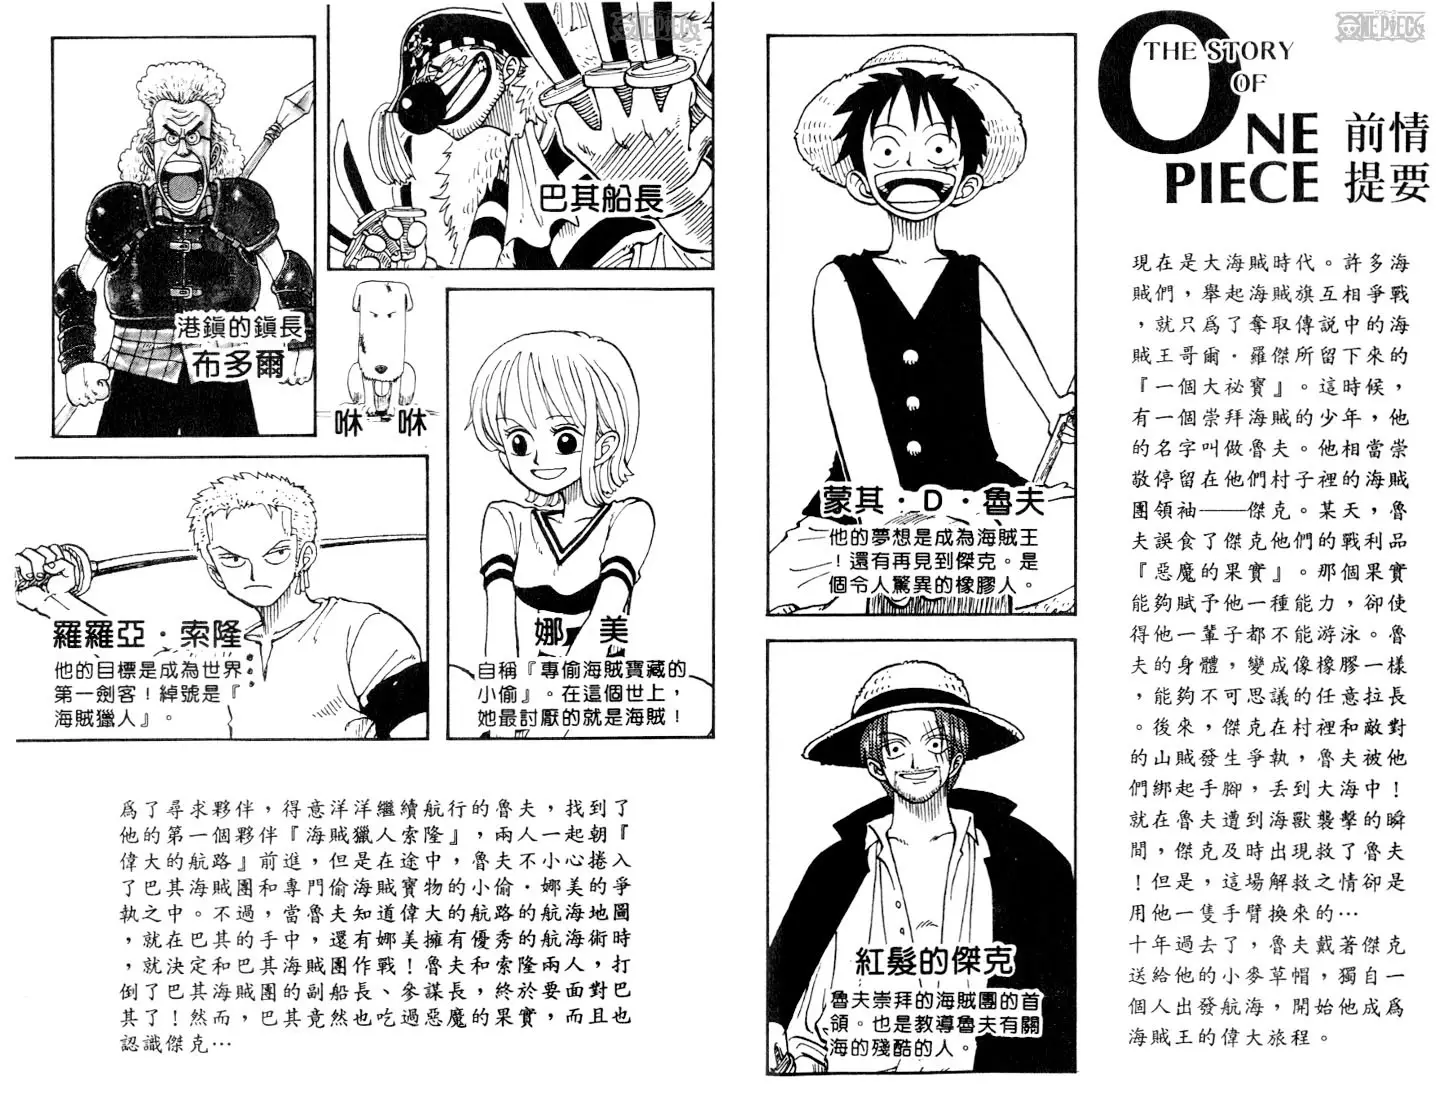 One Piece - 18 page p_00004